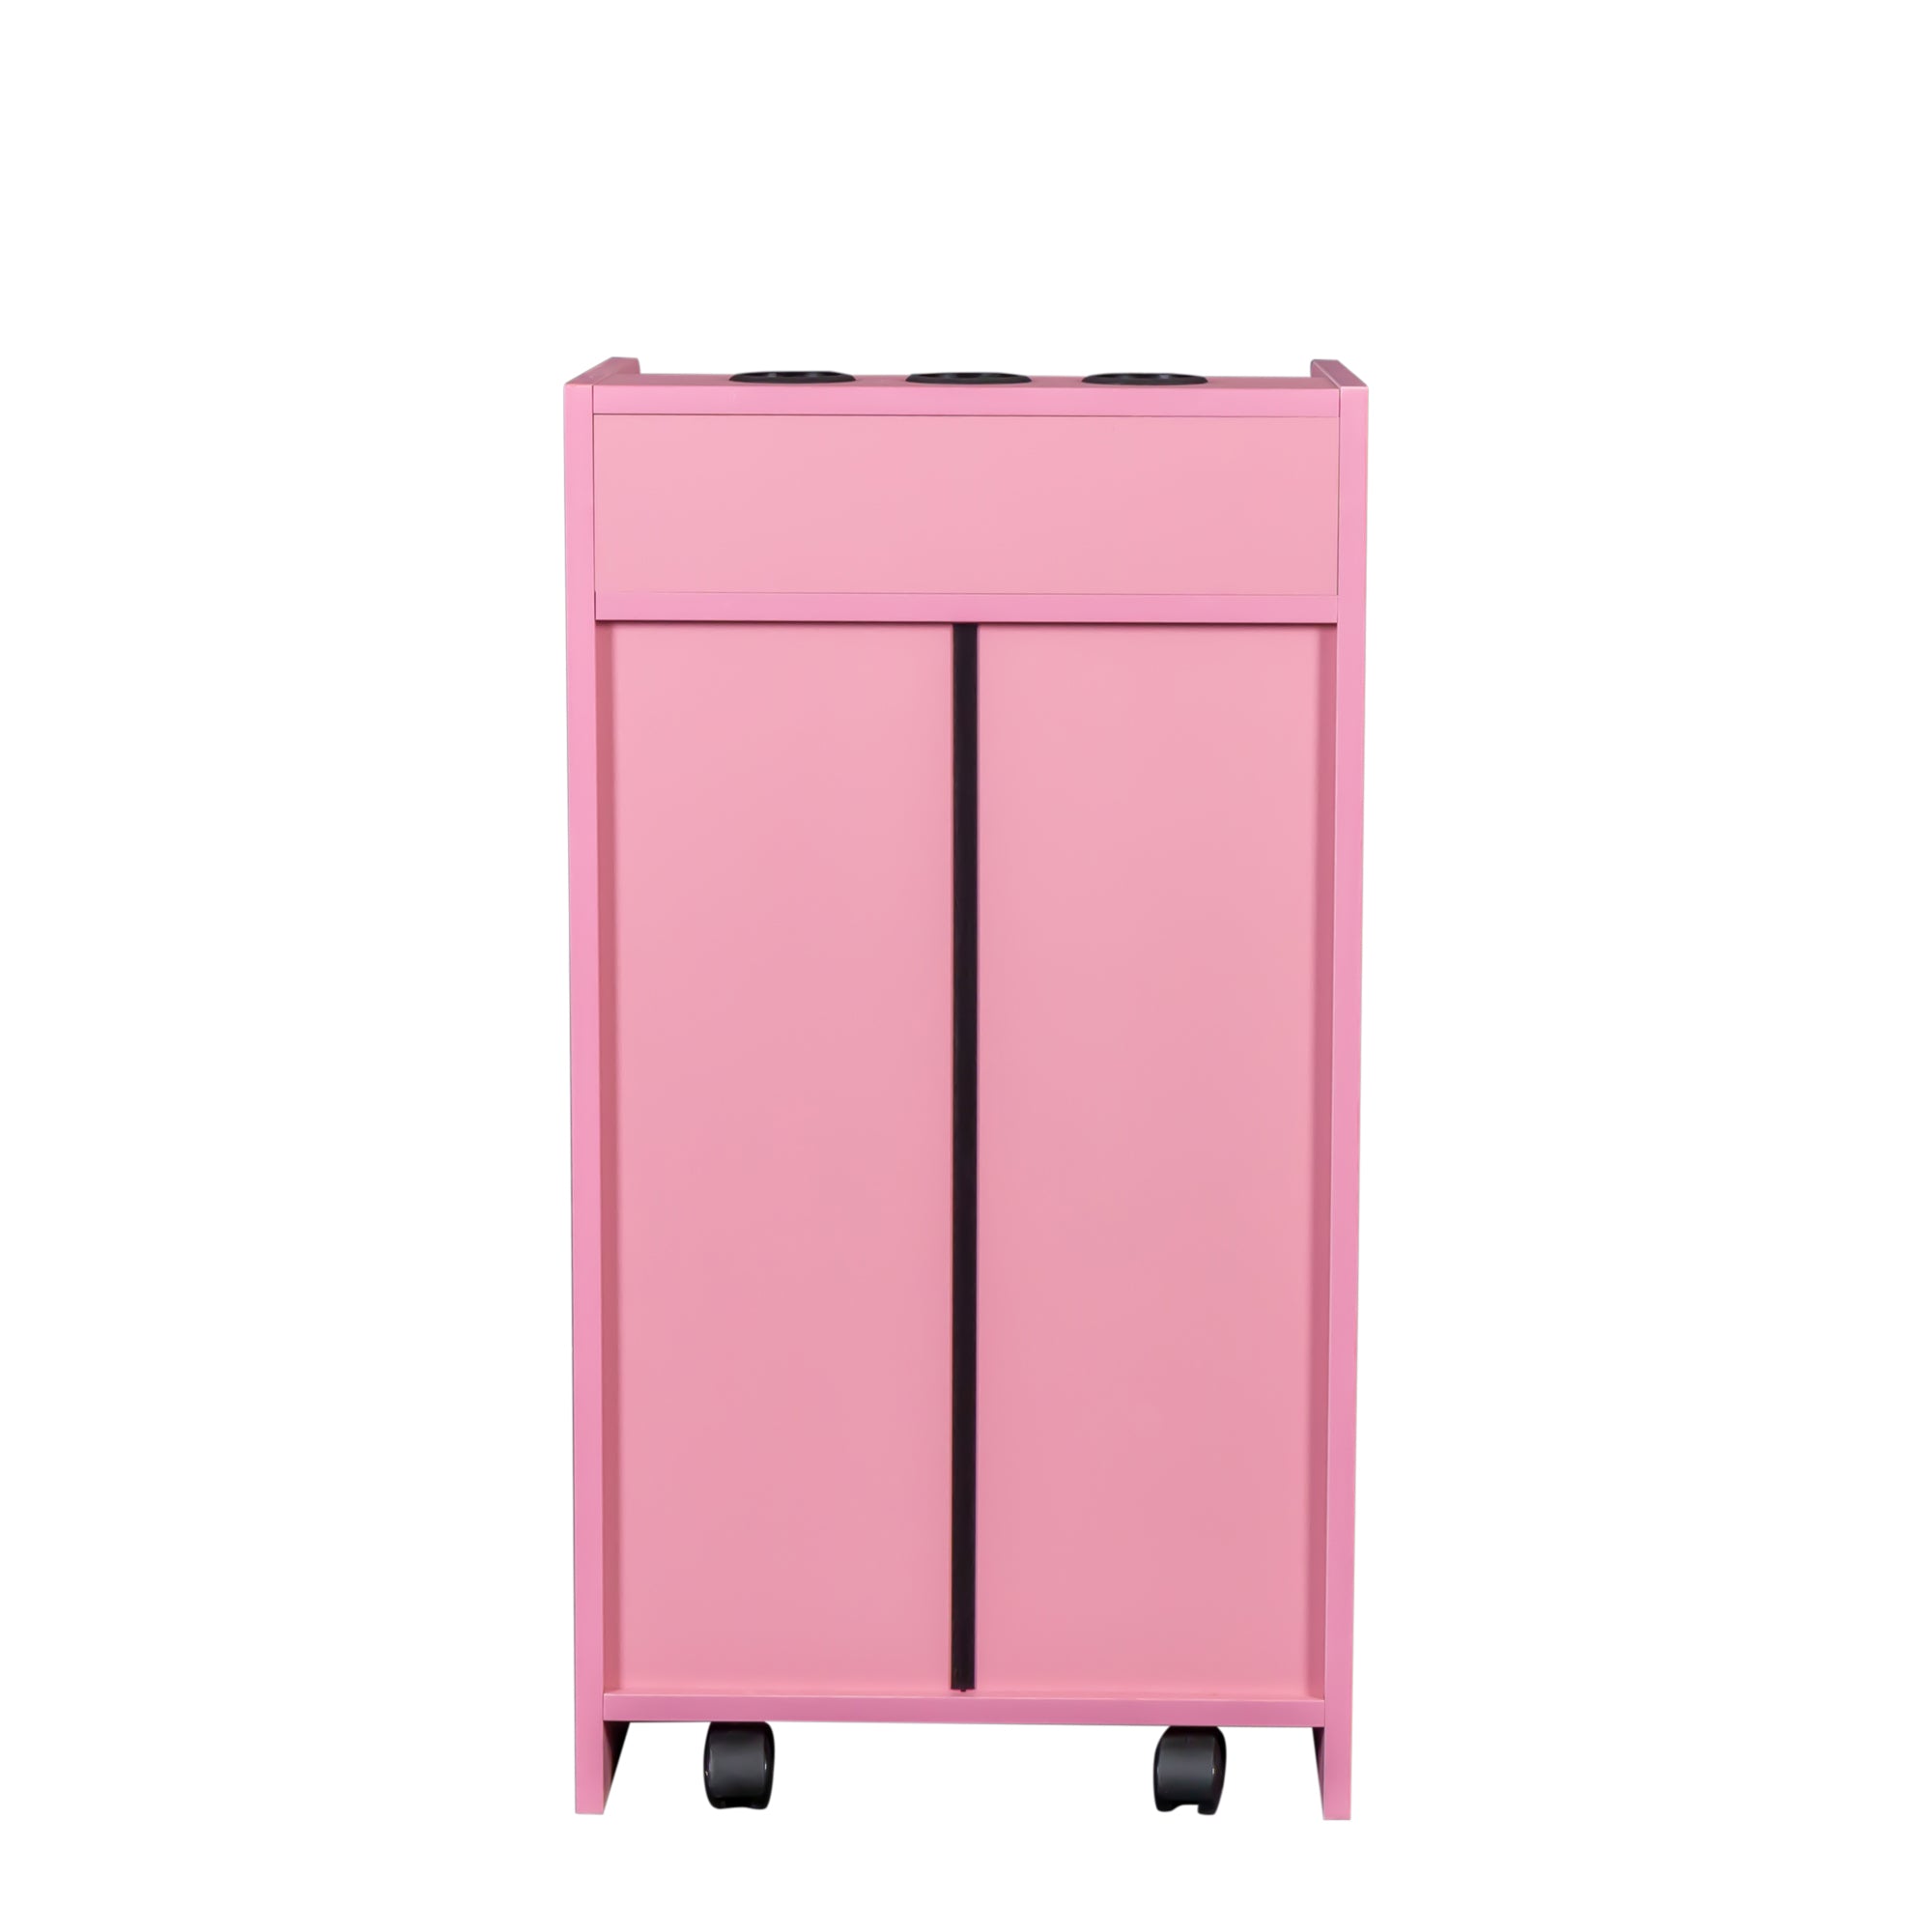 Salon Lockable Storage Cabinet for Holder Stylist Equipment with Drawers and Storage - Storage Cabinets